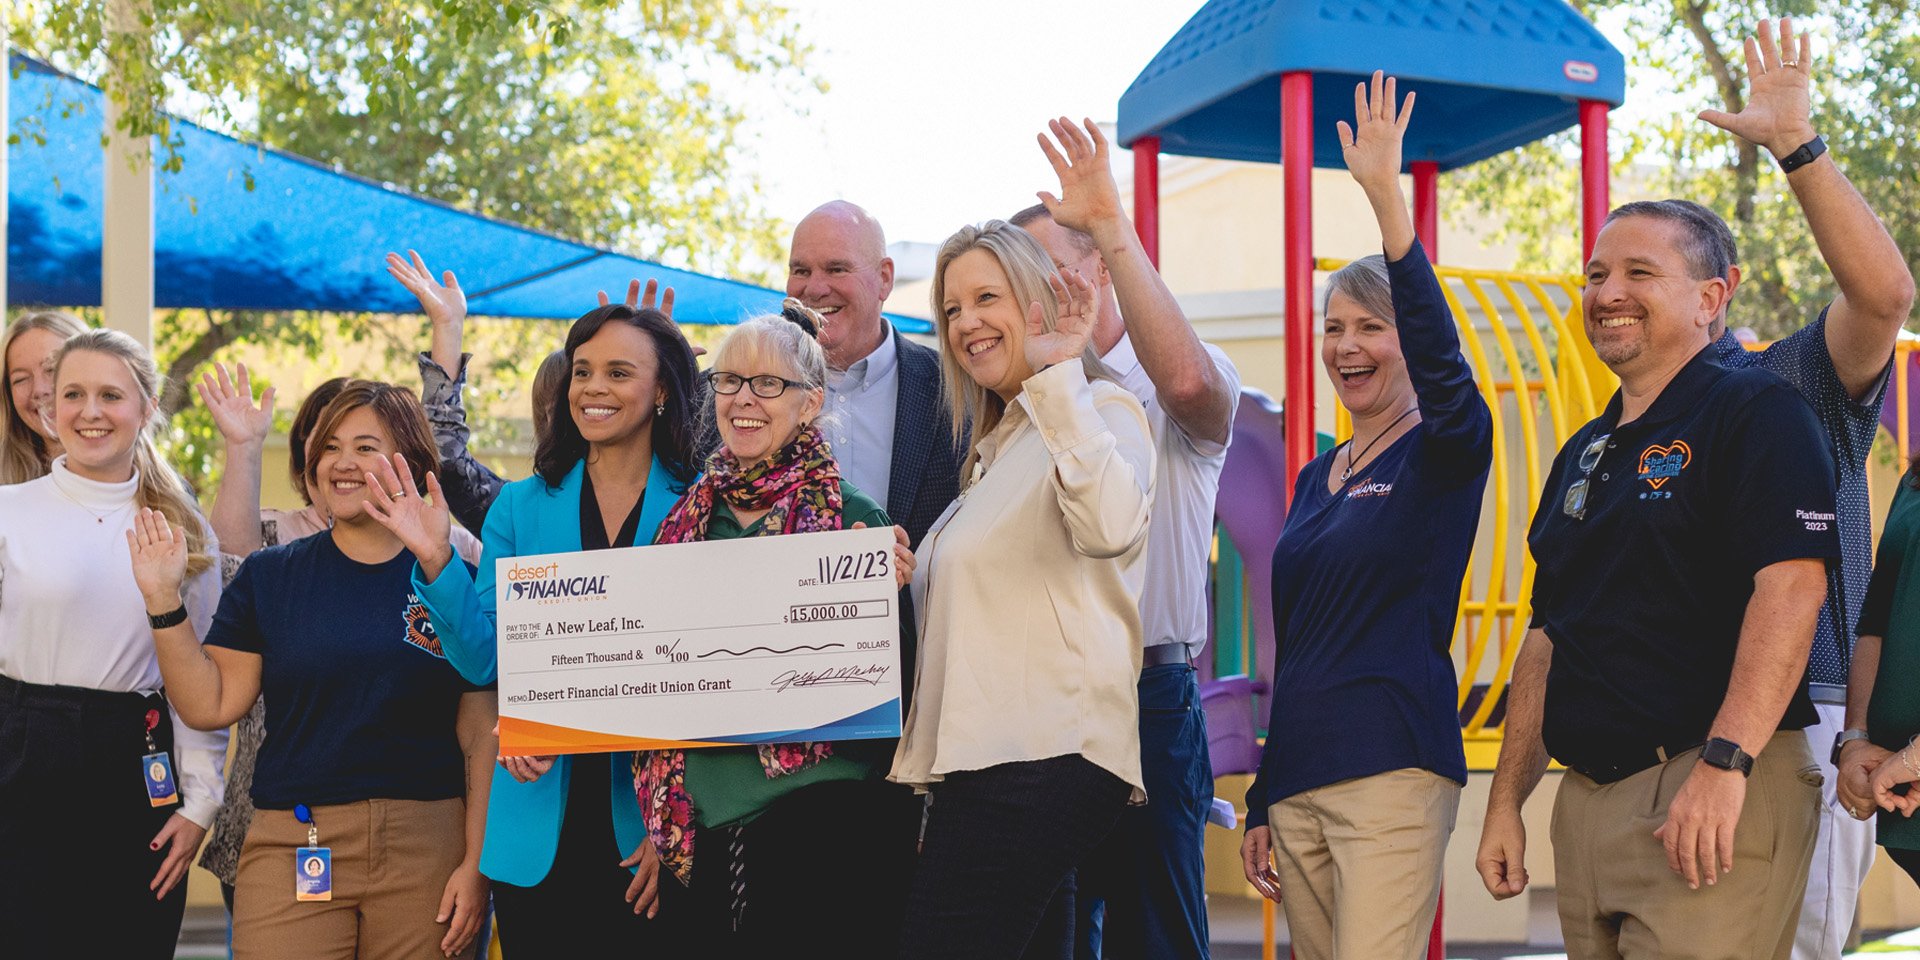 Carlissa Wright and a group of individuals gather around a large check made out to 'A New Leaf, Inc.' for a generous $15,000 grant from Desert Financial. The setting is an outdoor playground, capturing the moment of philanthropy and community support in action.